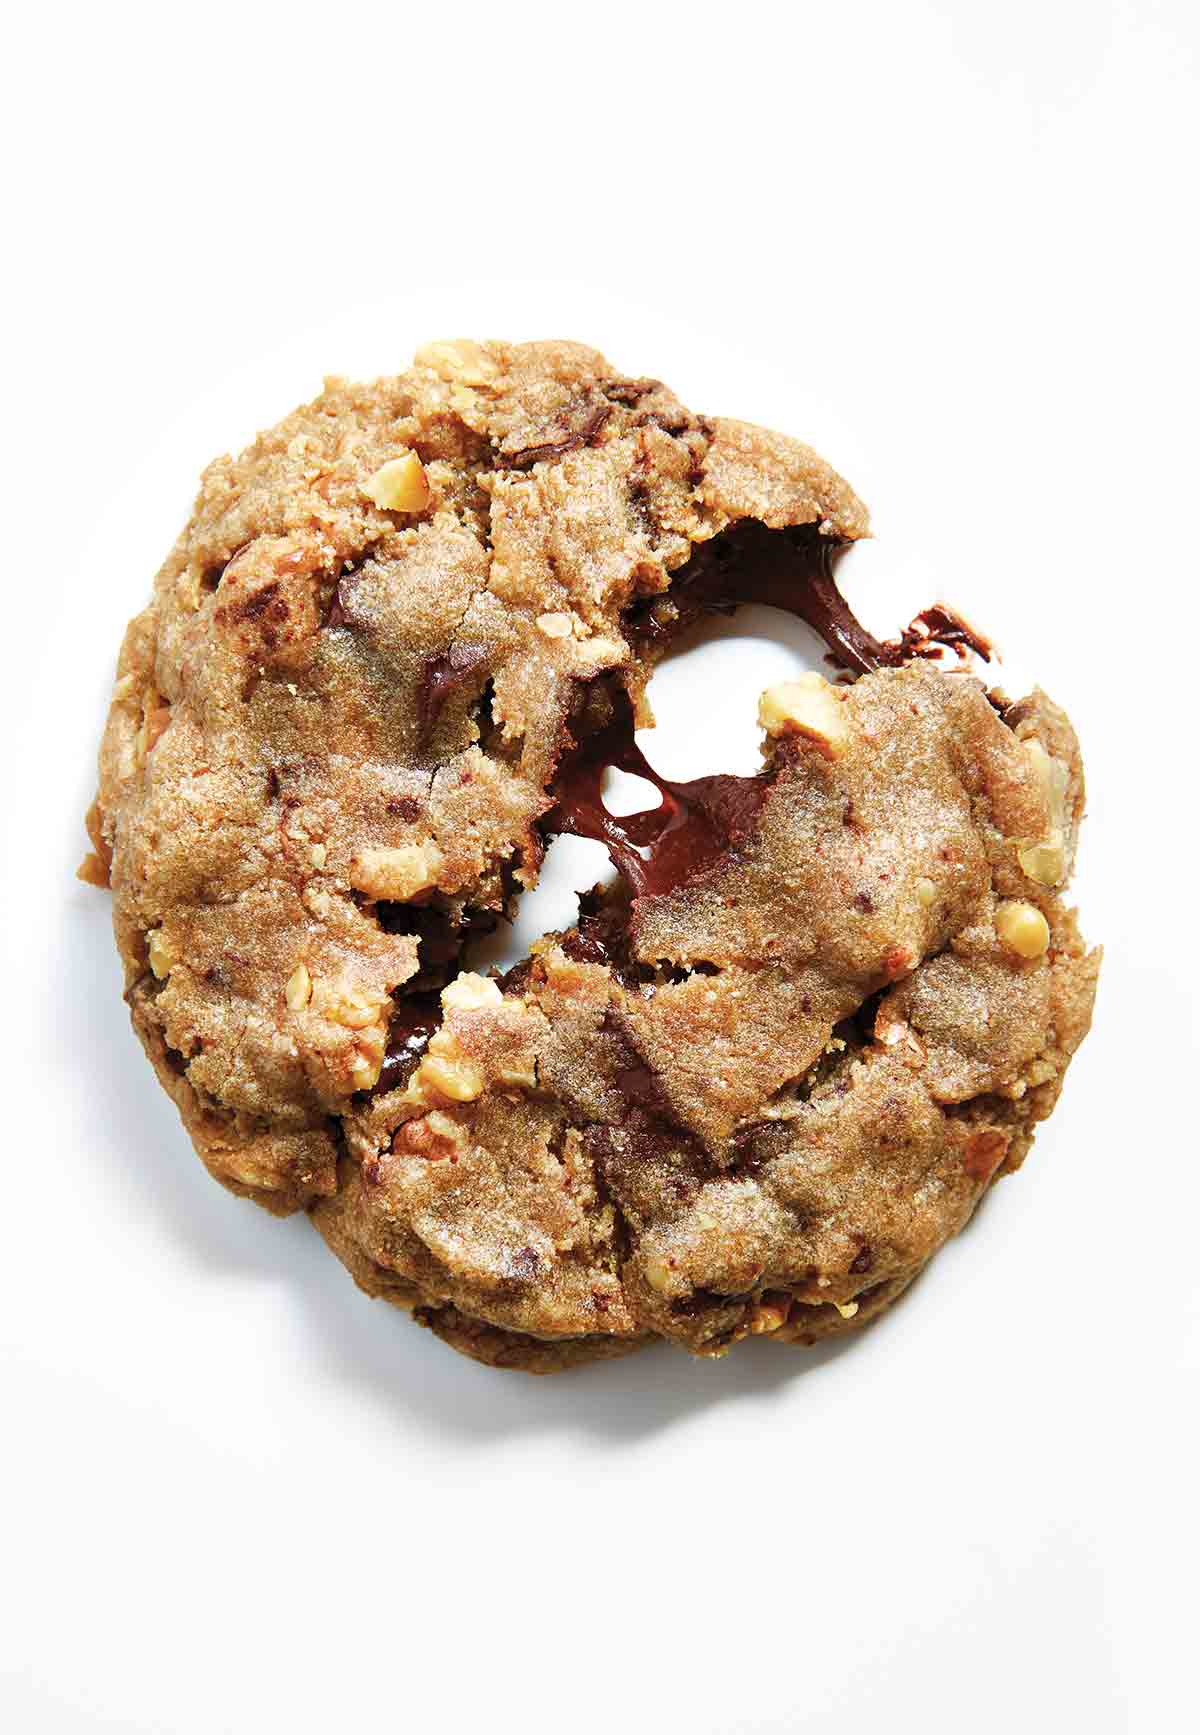 A chocolate chip cookie with nuts partially split in half.